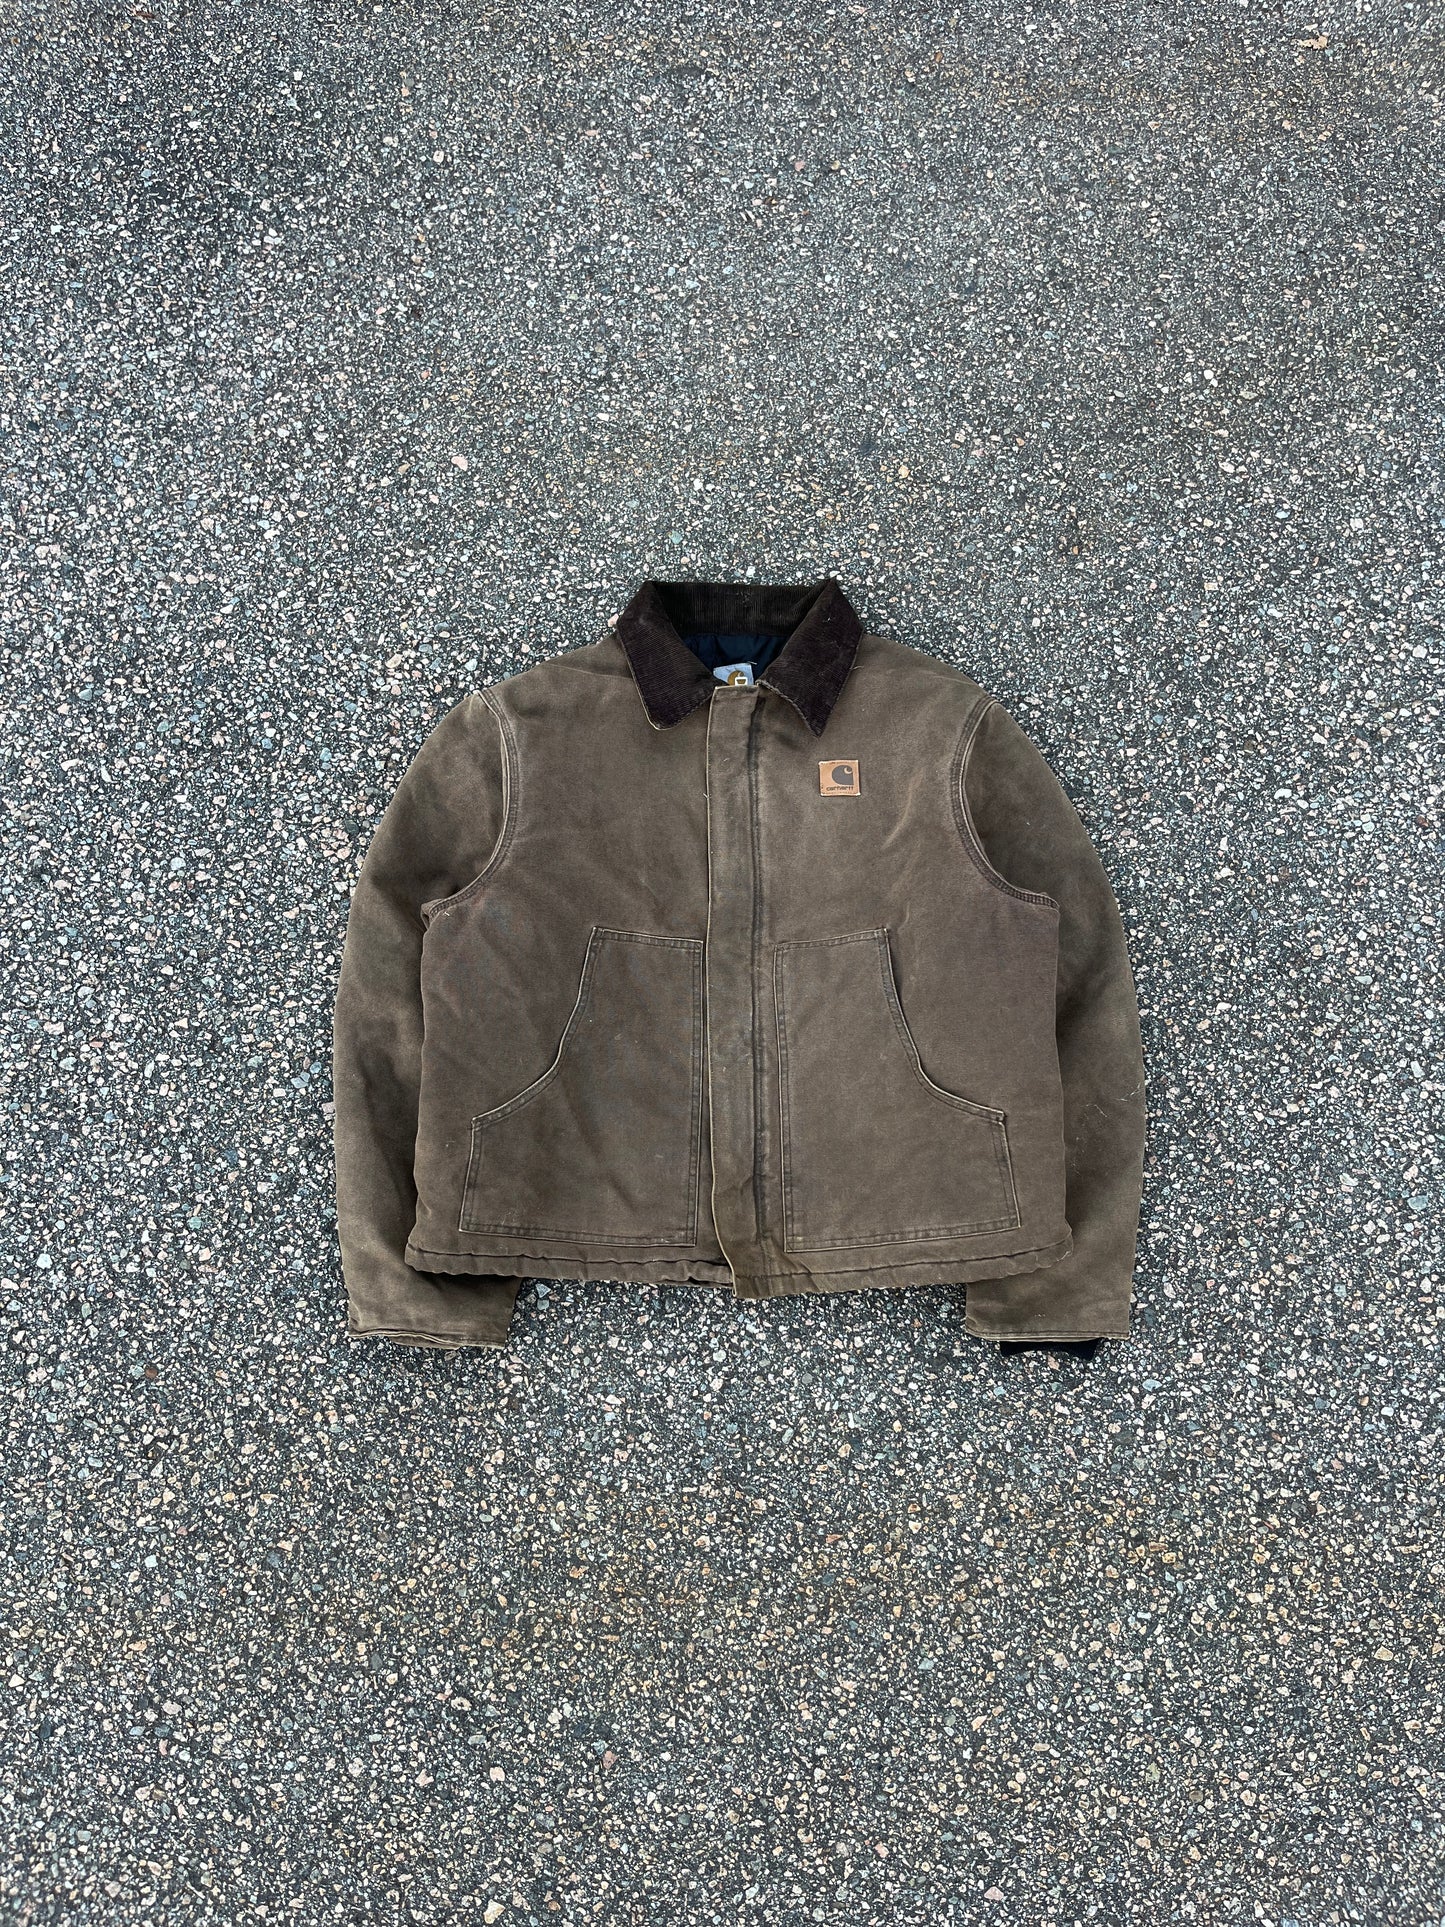 Faded Chestnut Brown Carhartt Arctic Jacket - Boxy Large